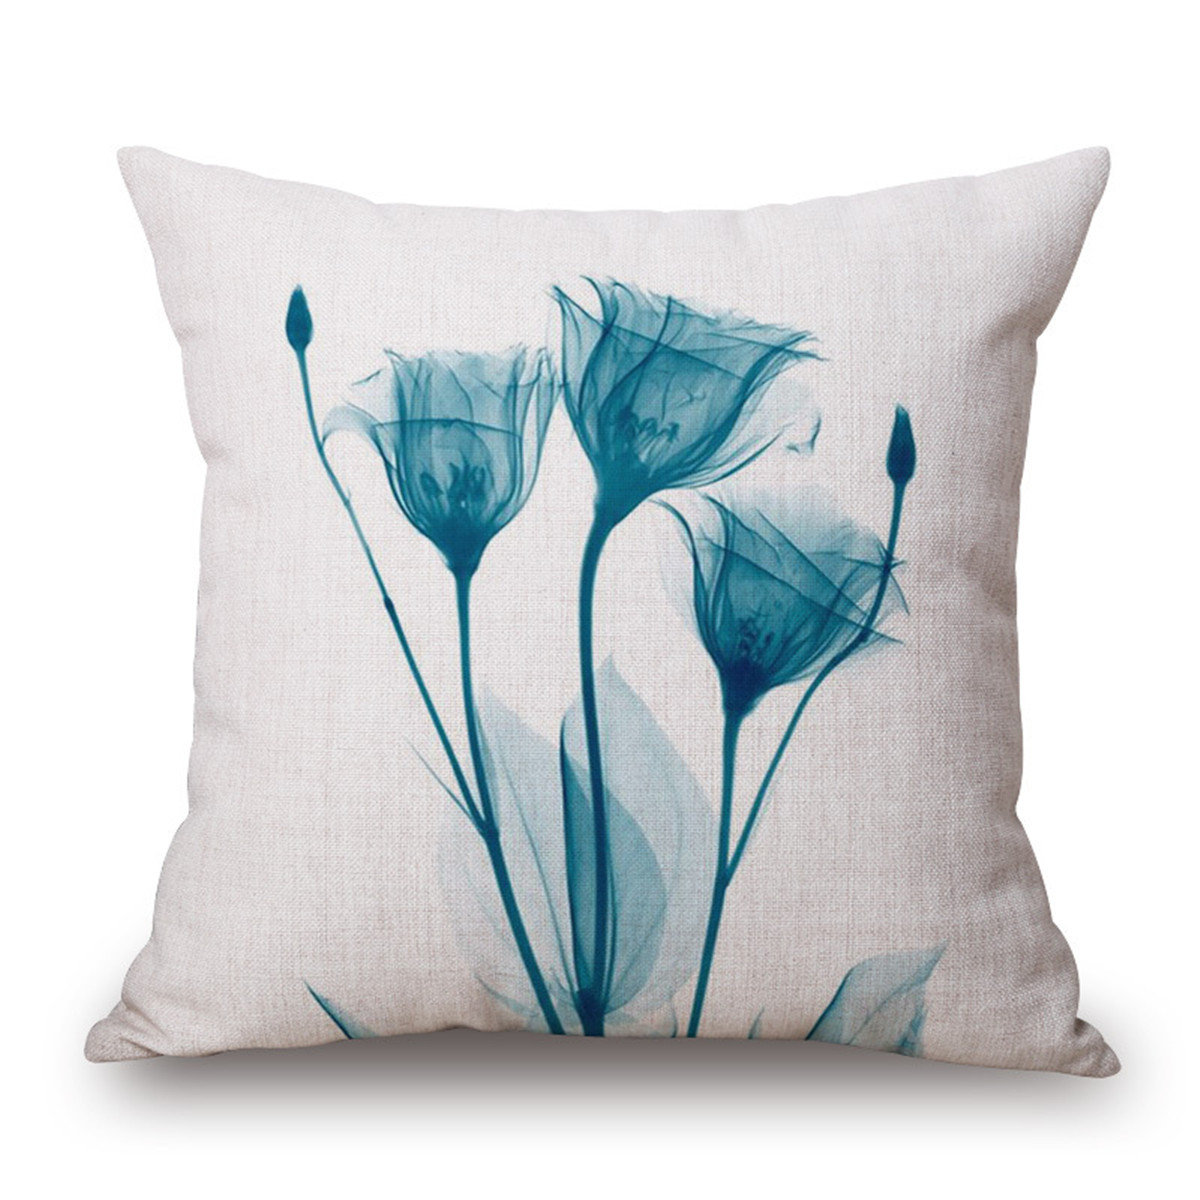 Ink-Painting-Flowers-Cotton-Linen-Pillow-Case-Tulips-Sofa-Cushion-Cover-45x45cm-1161674-5